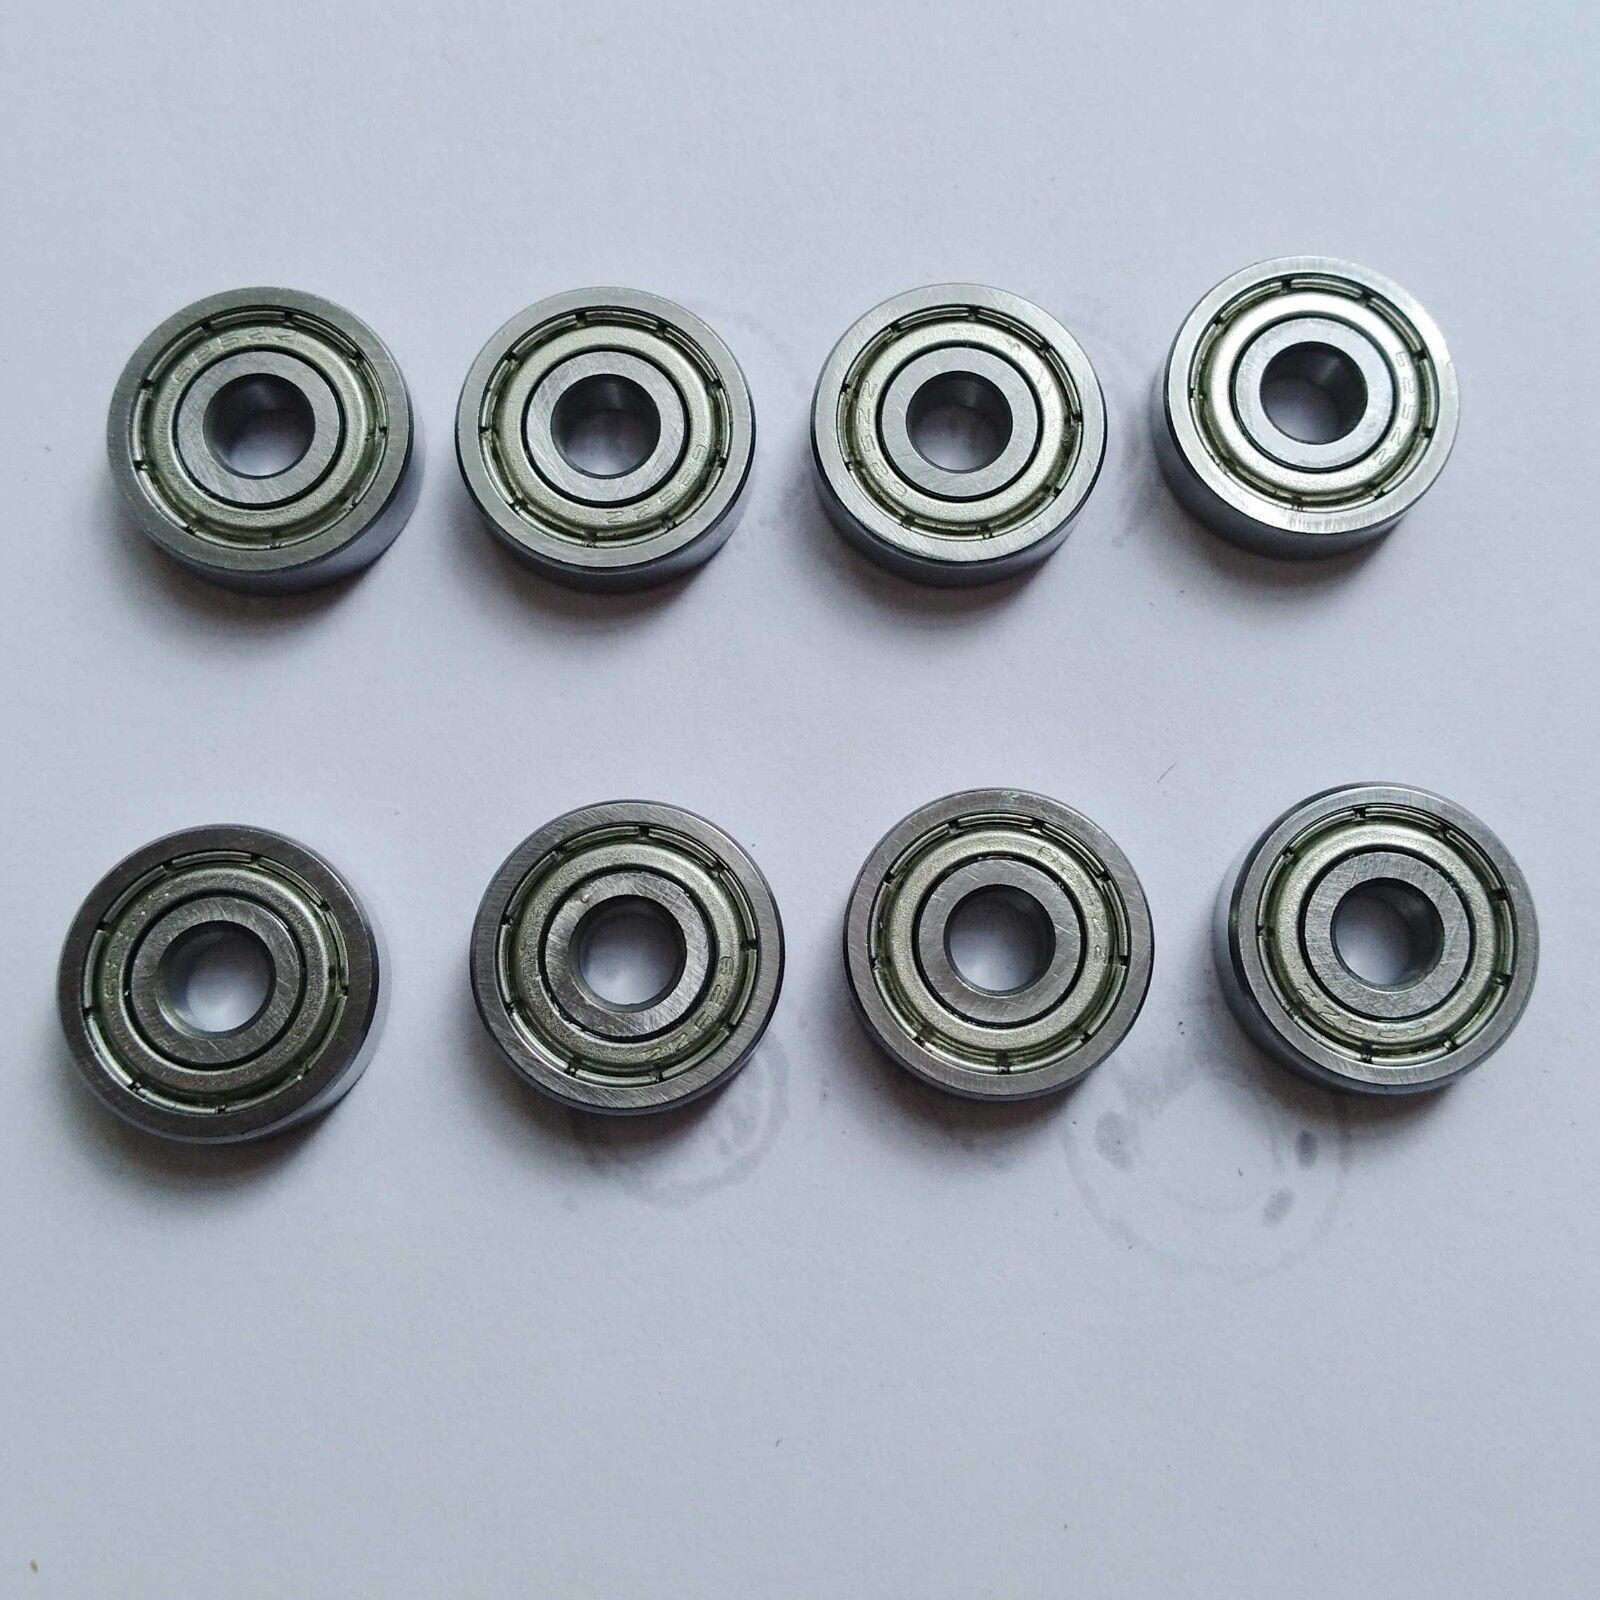 8pcs 625 2Z 625-ZZ C3 Double Metal Shielded Ball Bearing 5x16x 5mm US Stock M496 Unbranded Does Not Apply